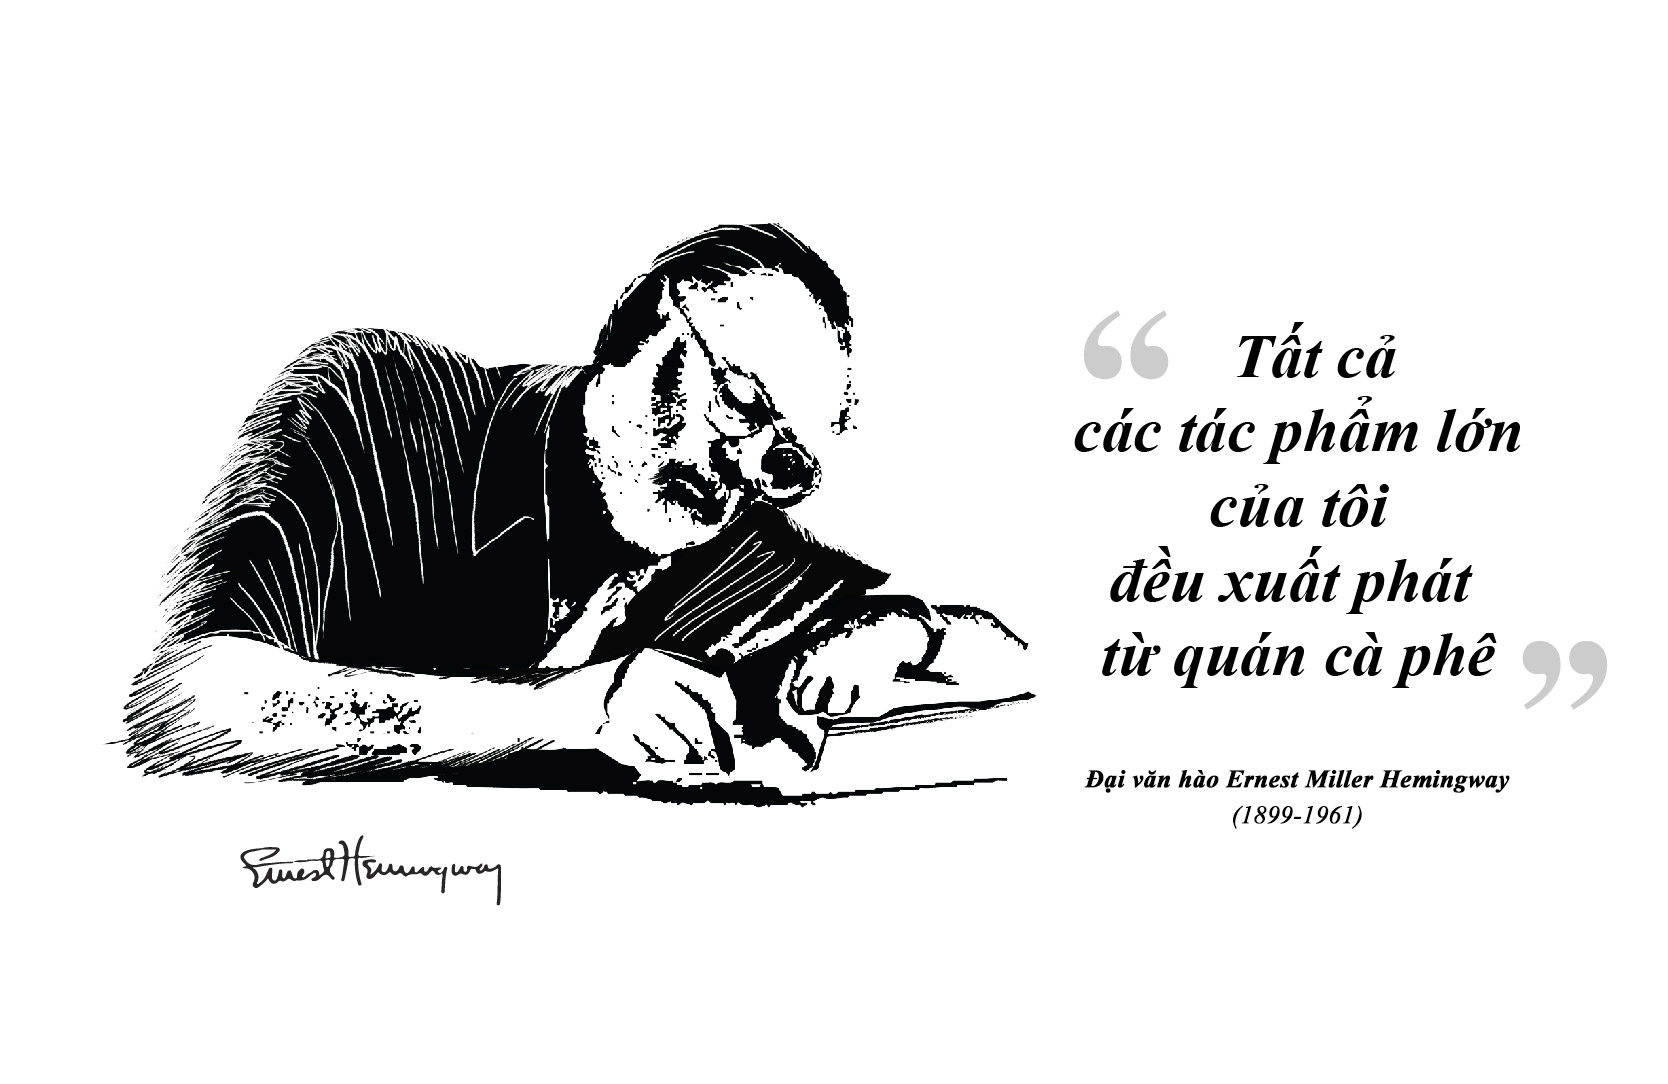 “All my great works came from café.” Ernest Miller Hemingway (1899 – 1961)